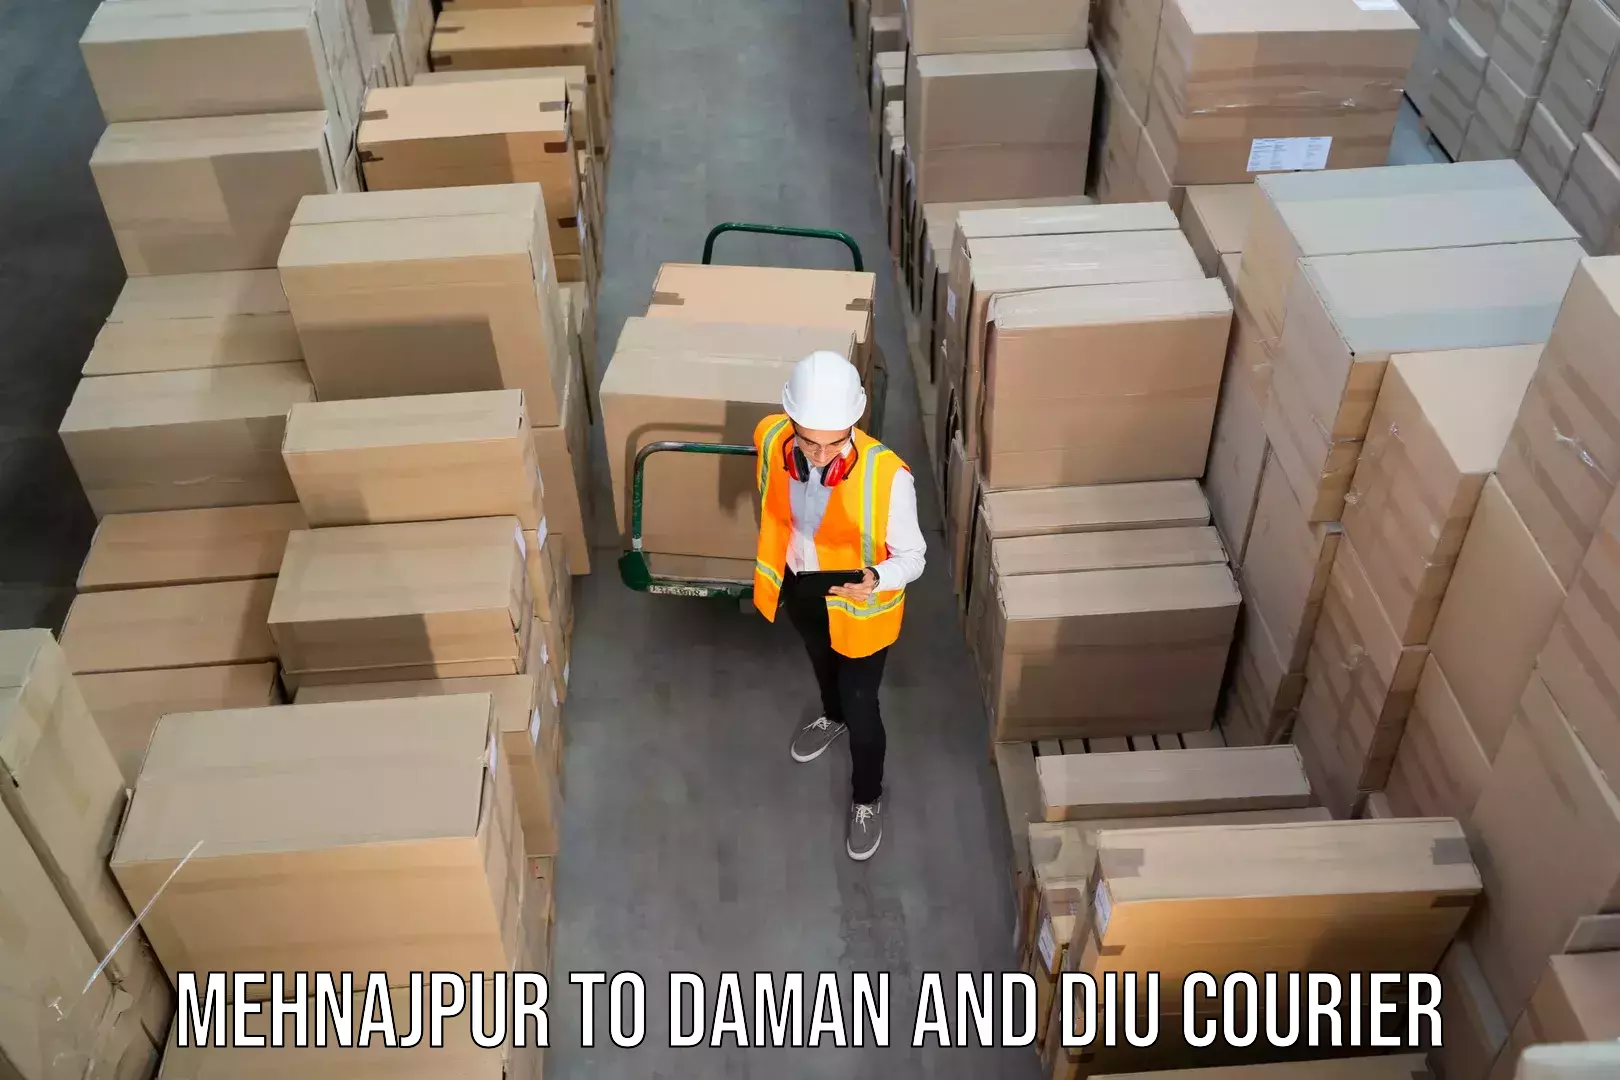 Global parcel delivery Mehnajpur to Daman and Diu